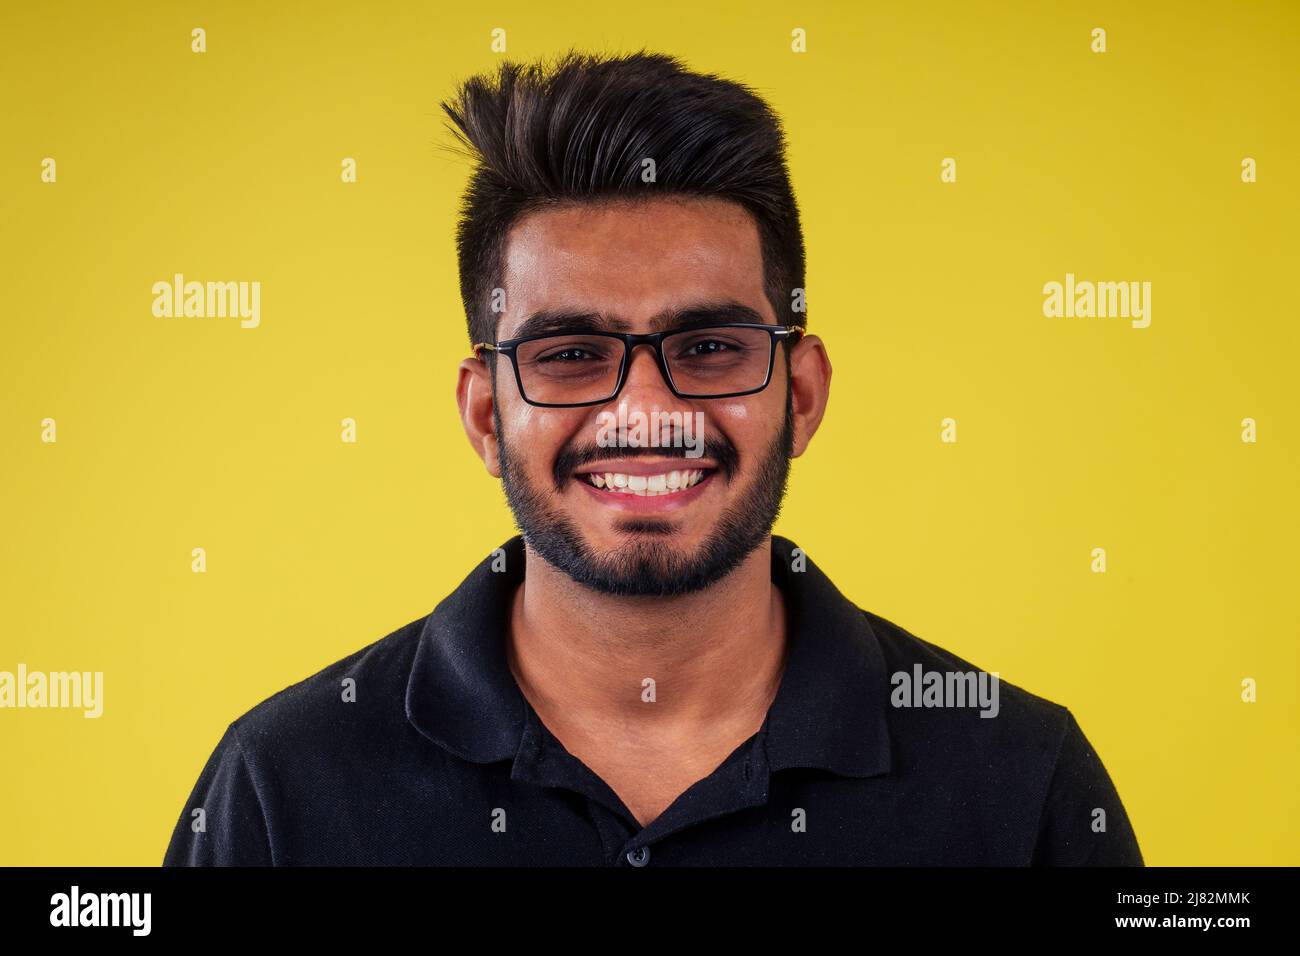 Portrait of handsome casual Indian male smiling, copy space at side. fase id concept Stock Photo